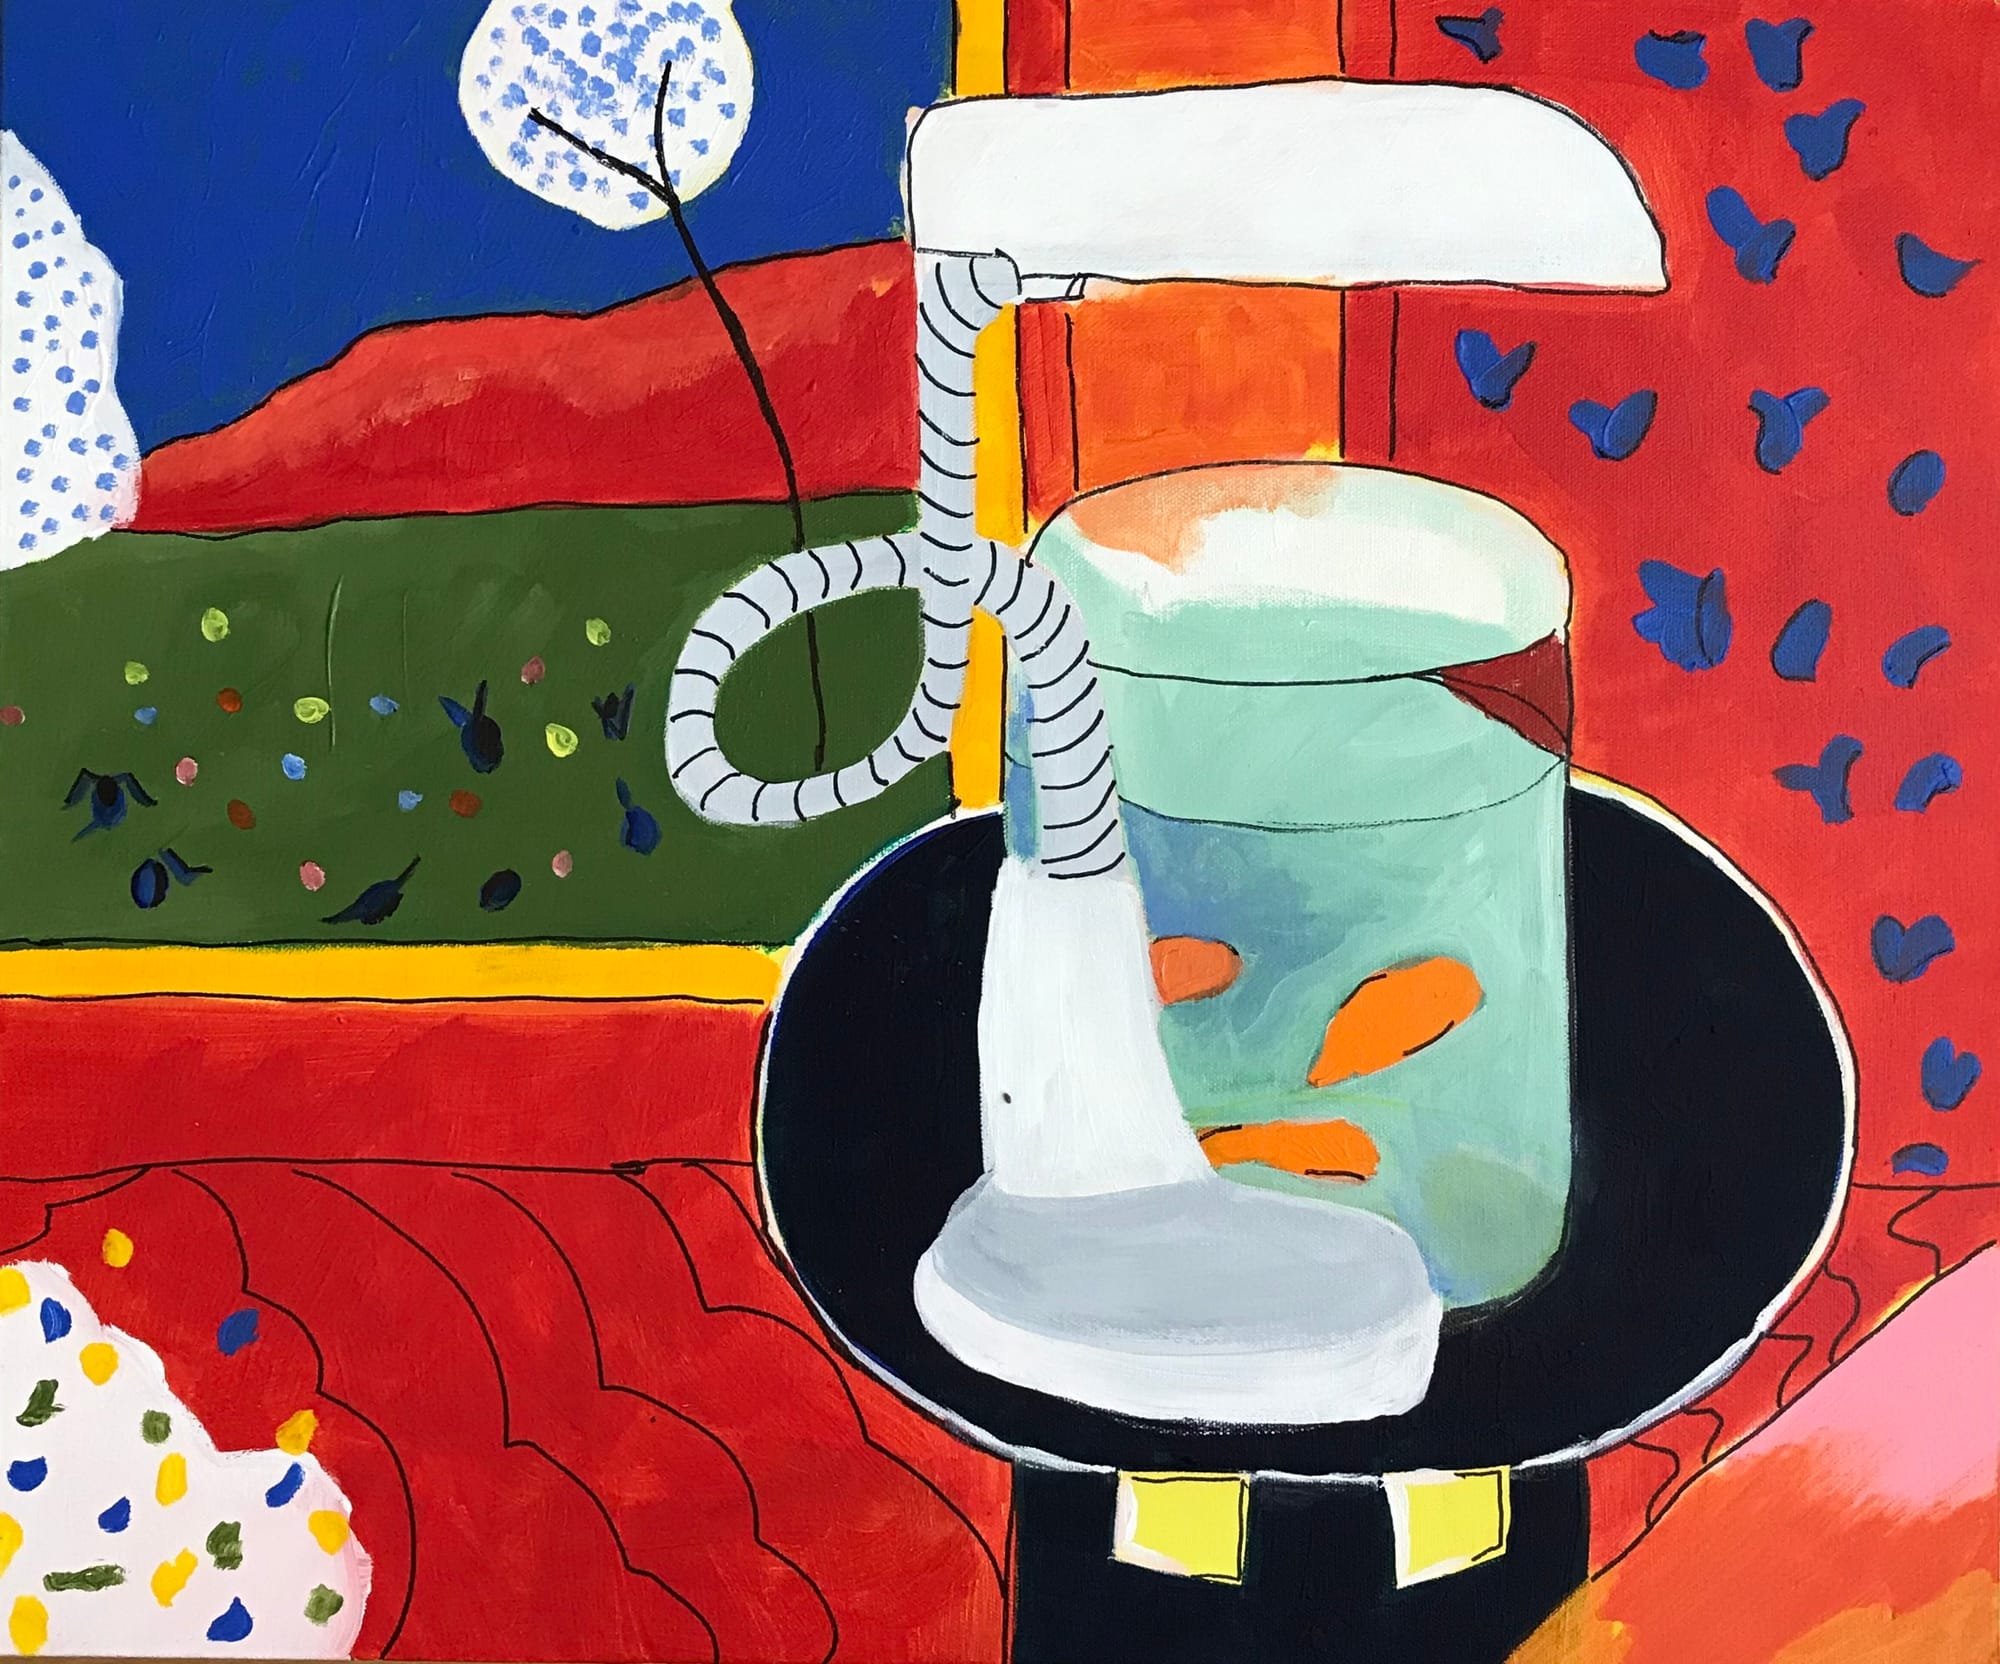 Fish in A Bowl (after Matisse)